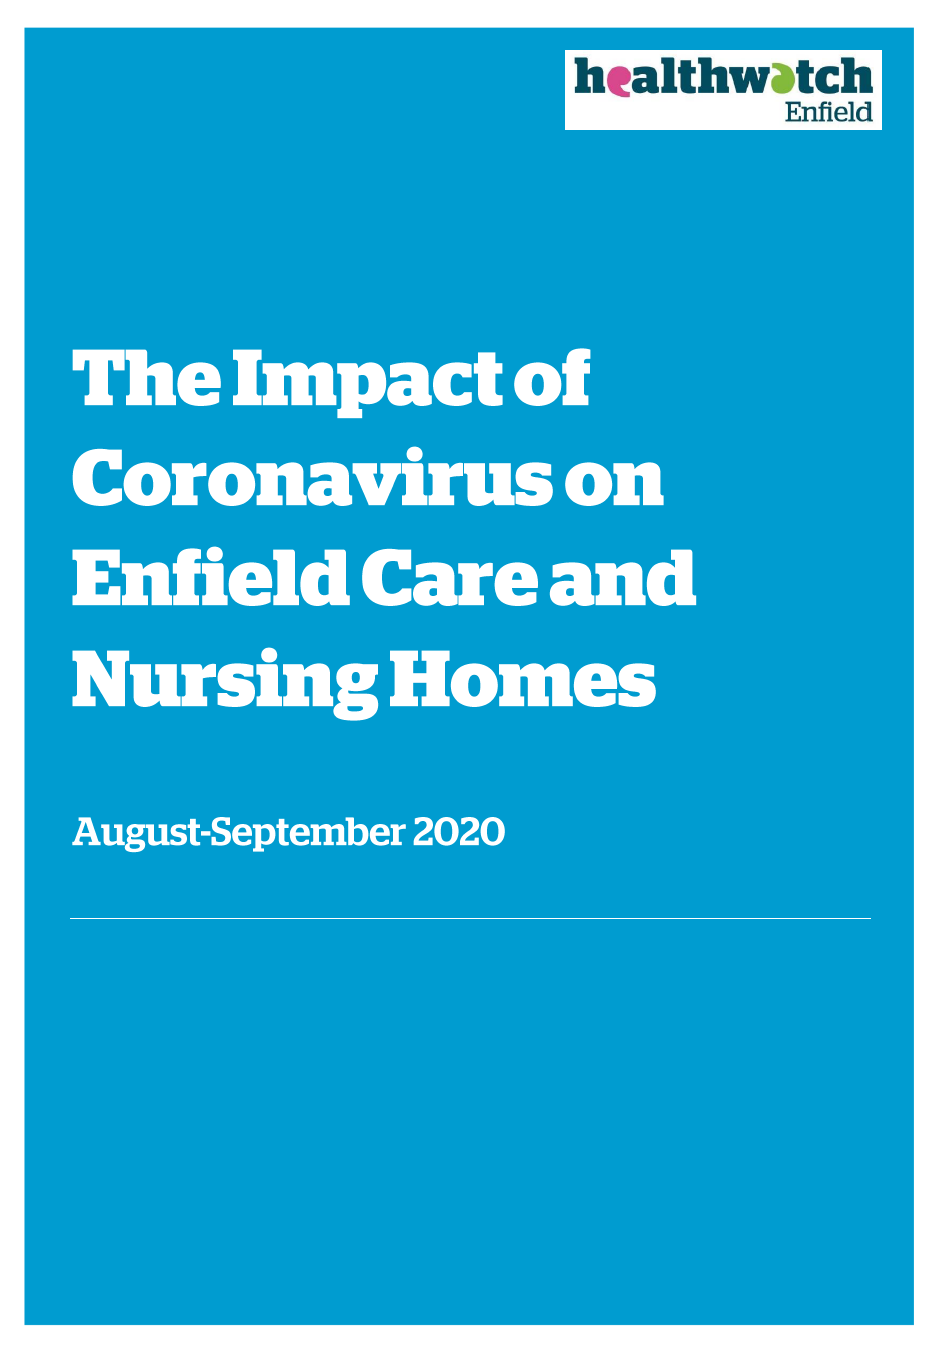 The impact of Coronavirus on Enfield care and nursing homes featured image